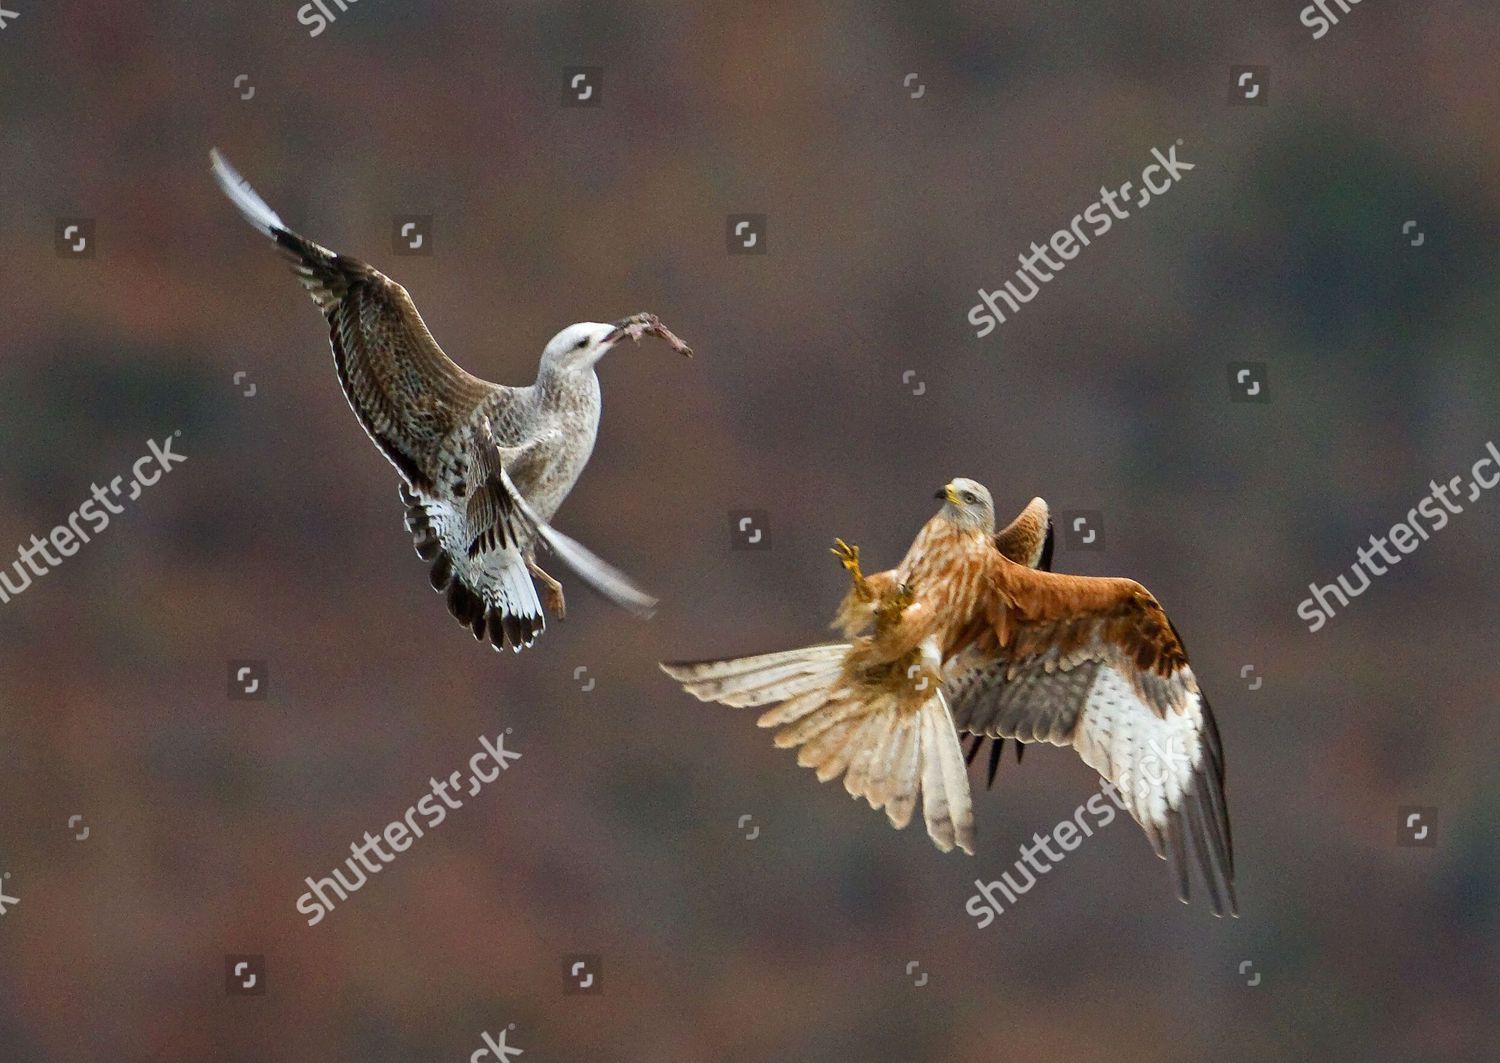 Red Kite Chases Gull Steal Food Editorial Stock Photo - Stock Image |  Shutterstock